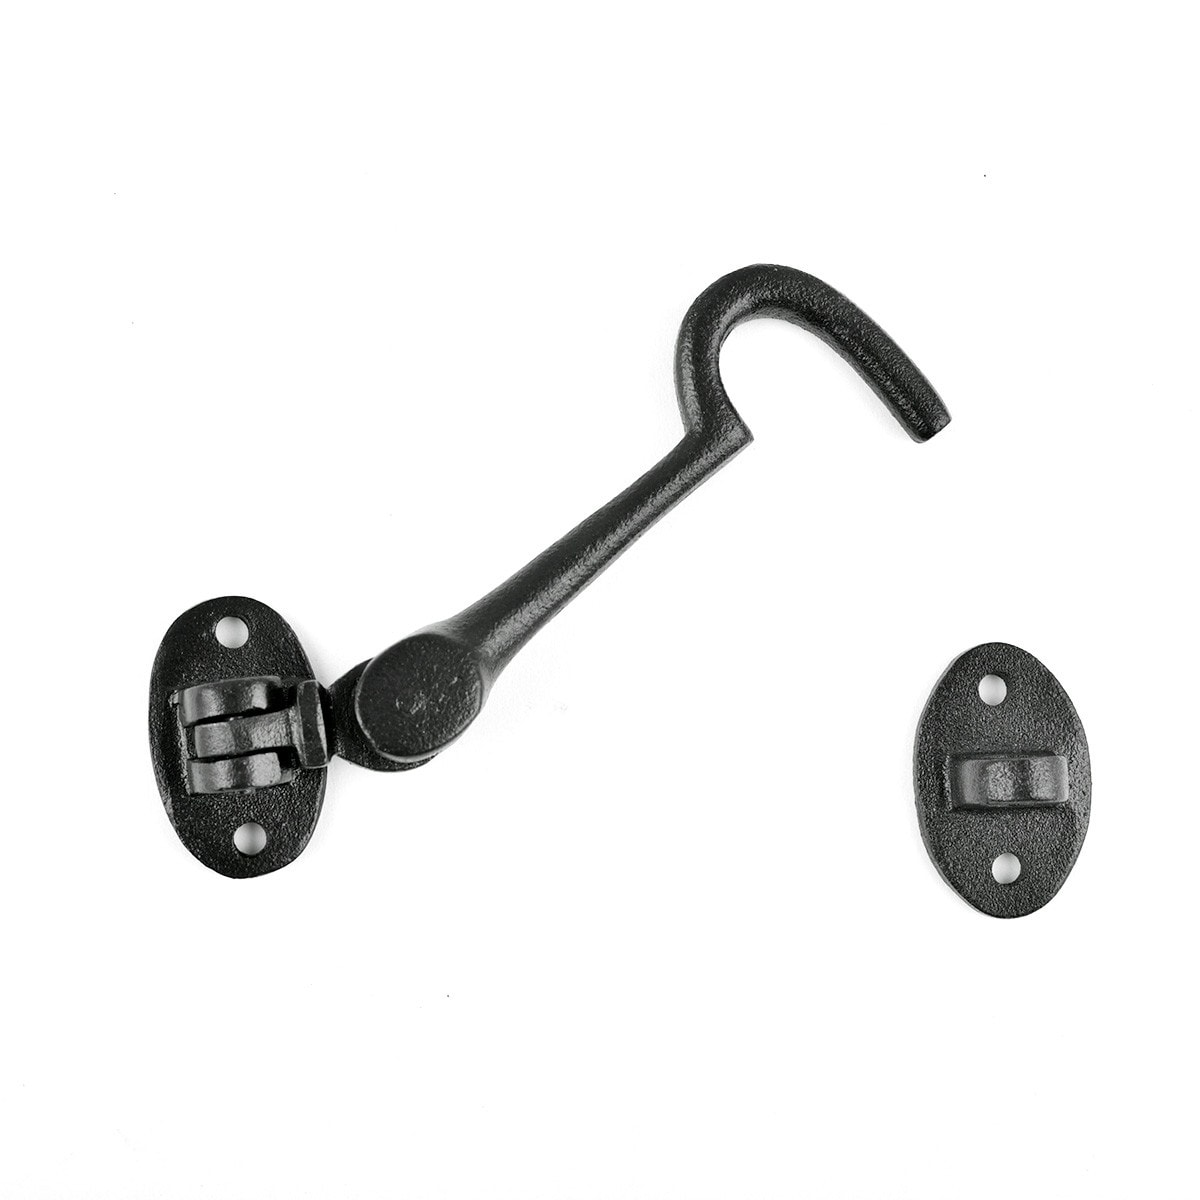 Black Wrought Iron Door Latch Lock 4.5 Swivel Style Hook and Eye Latch for  Door with Mounting Hardware Renovators Supply - Bed Bath & Beyond - 20669607